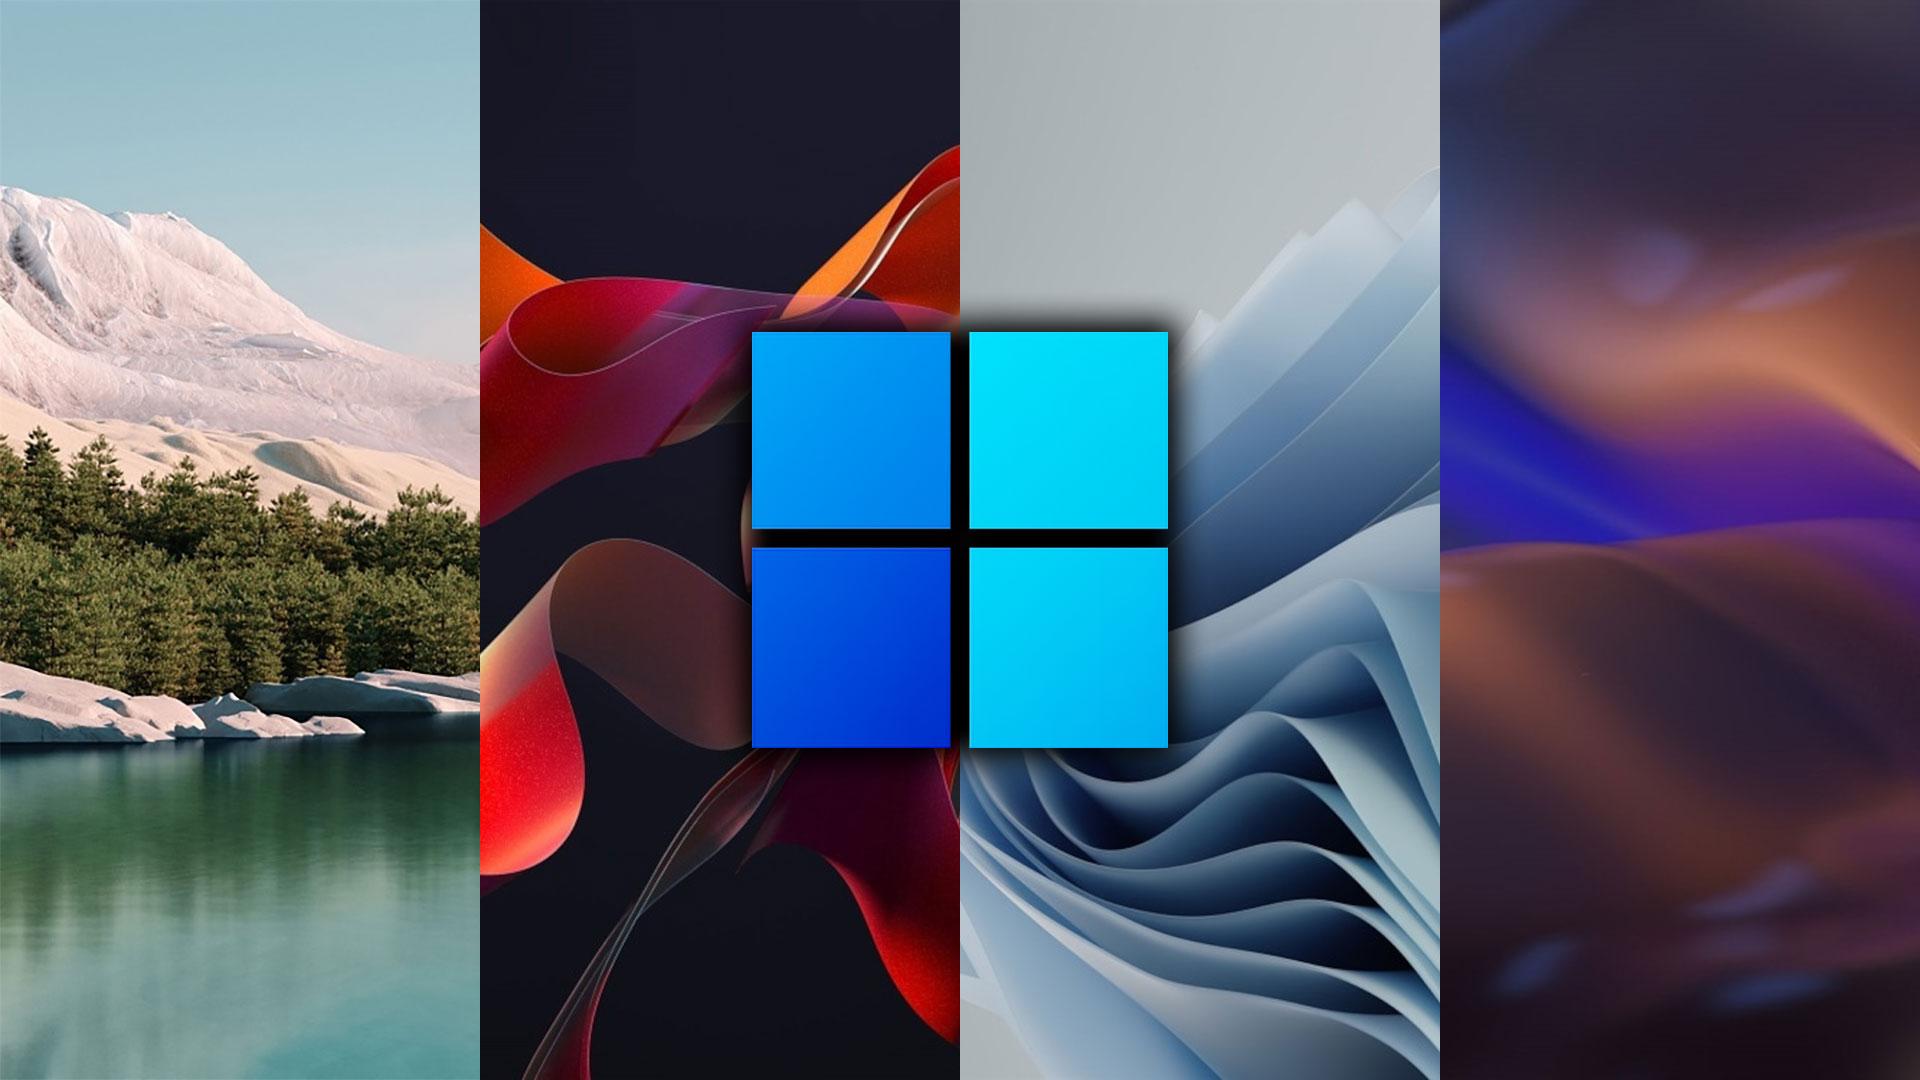 1920 x 1080 · jpeg - Windows 11: download the official wallpapers | Download - GizChina.it